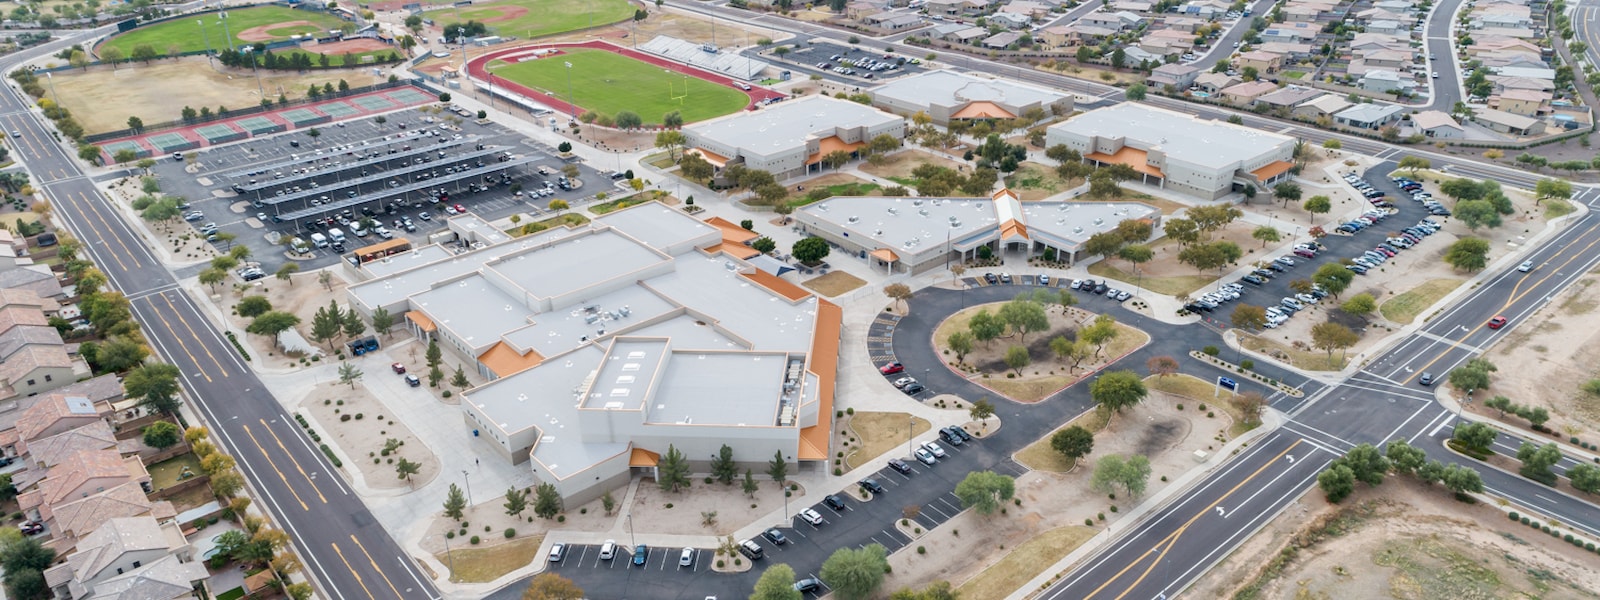 Willow Canyon campus from above.